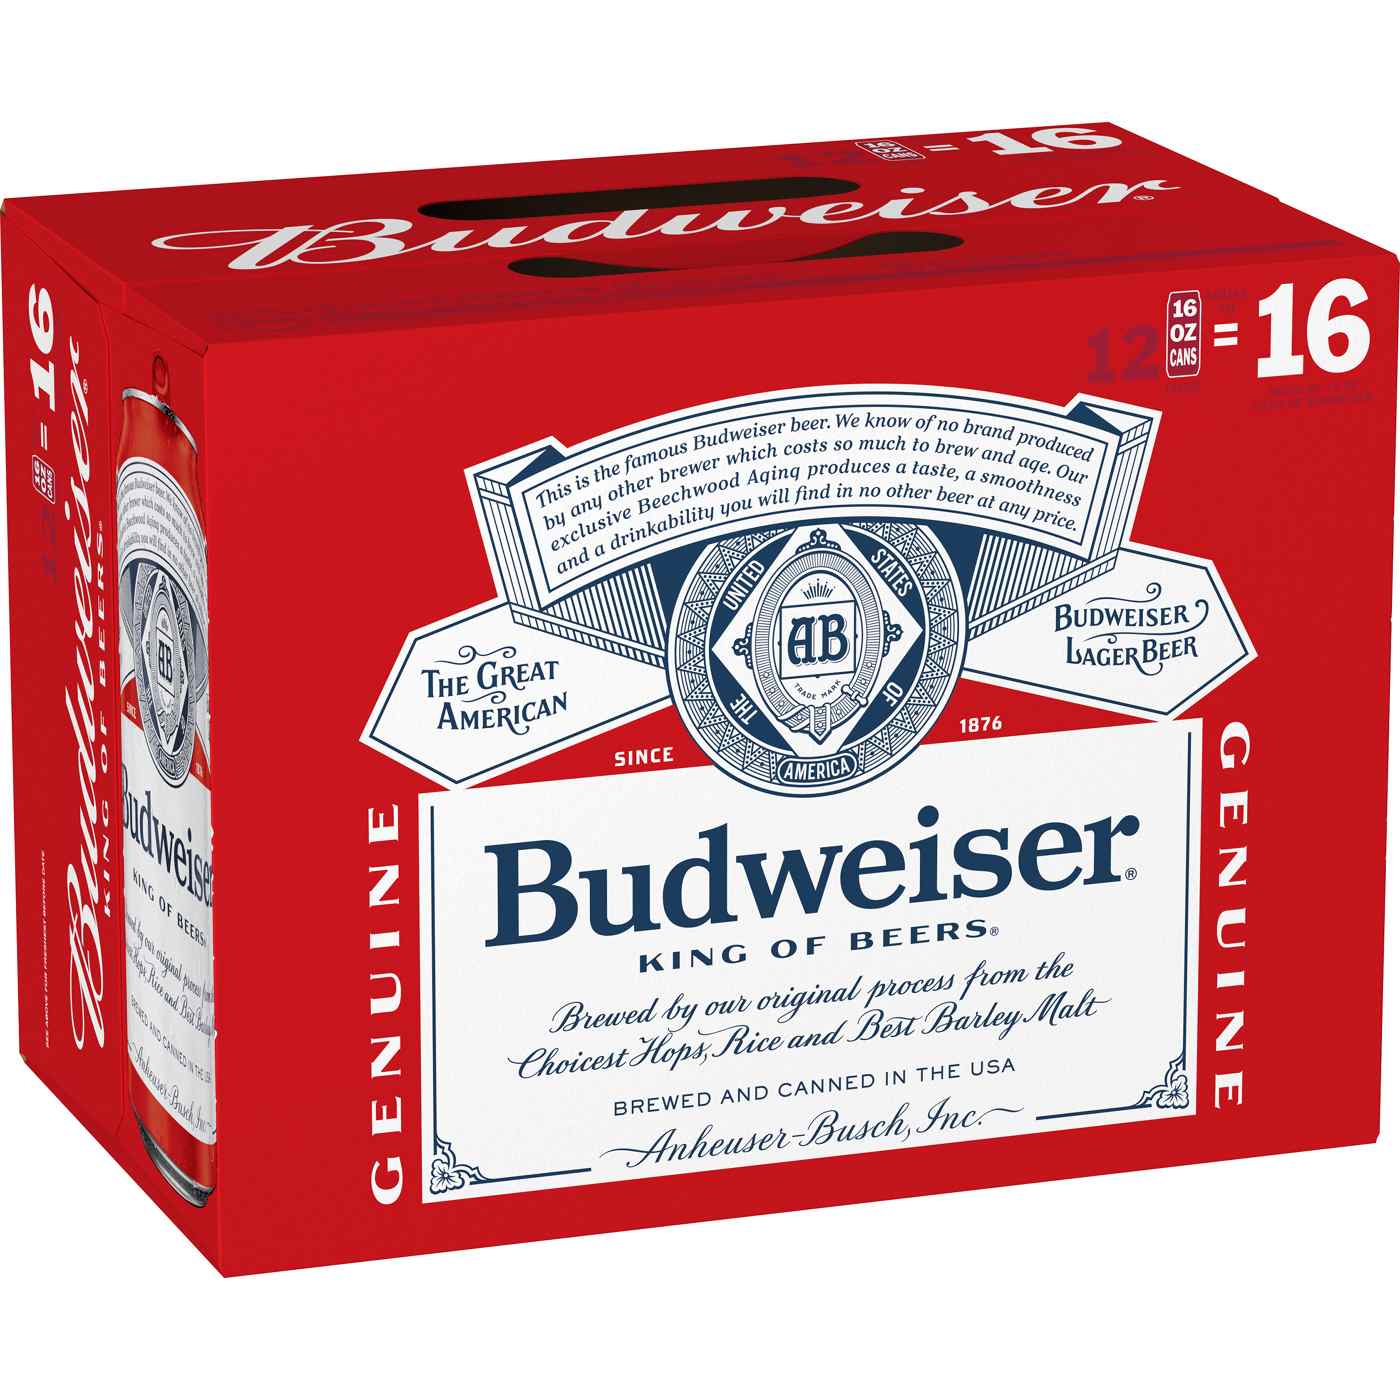 Budweiser Beer 16 oz Cans; image 1 of 2